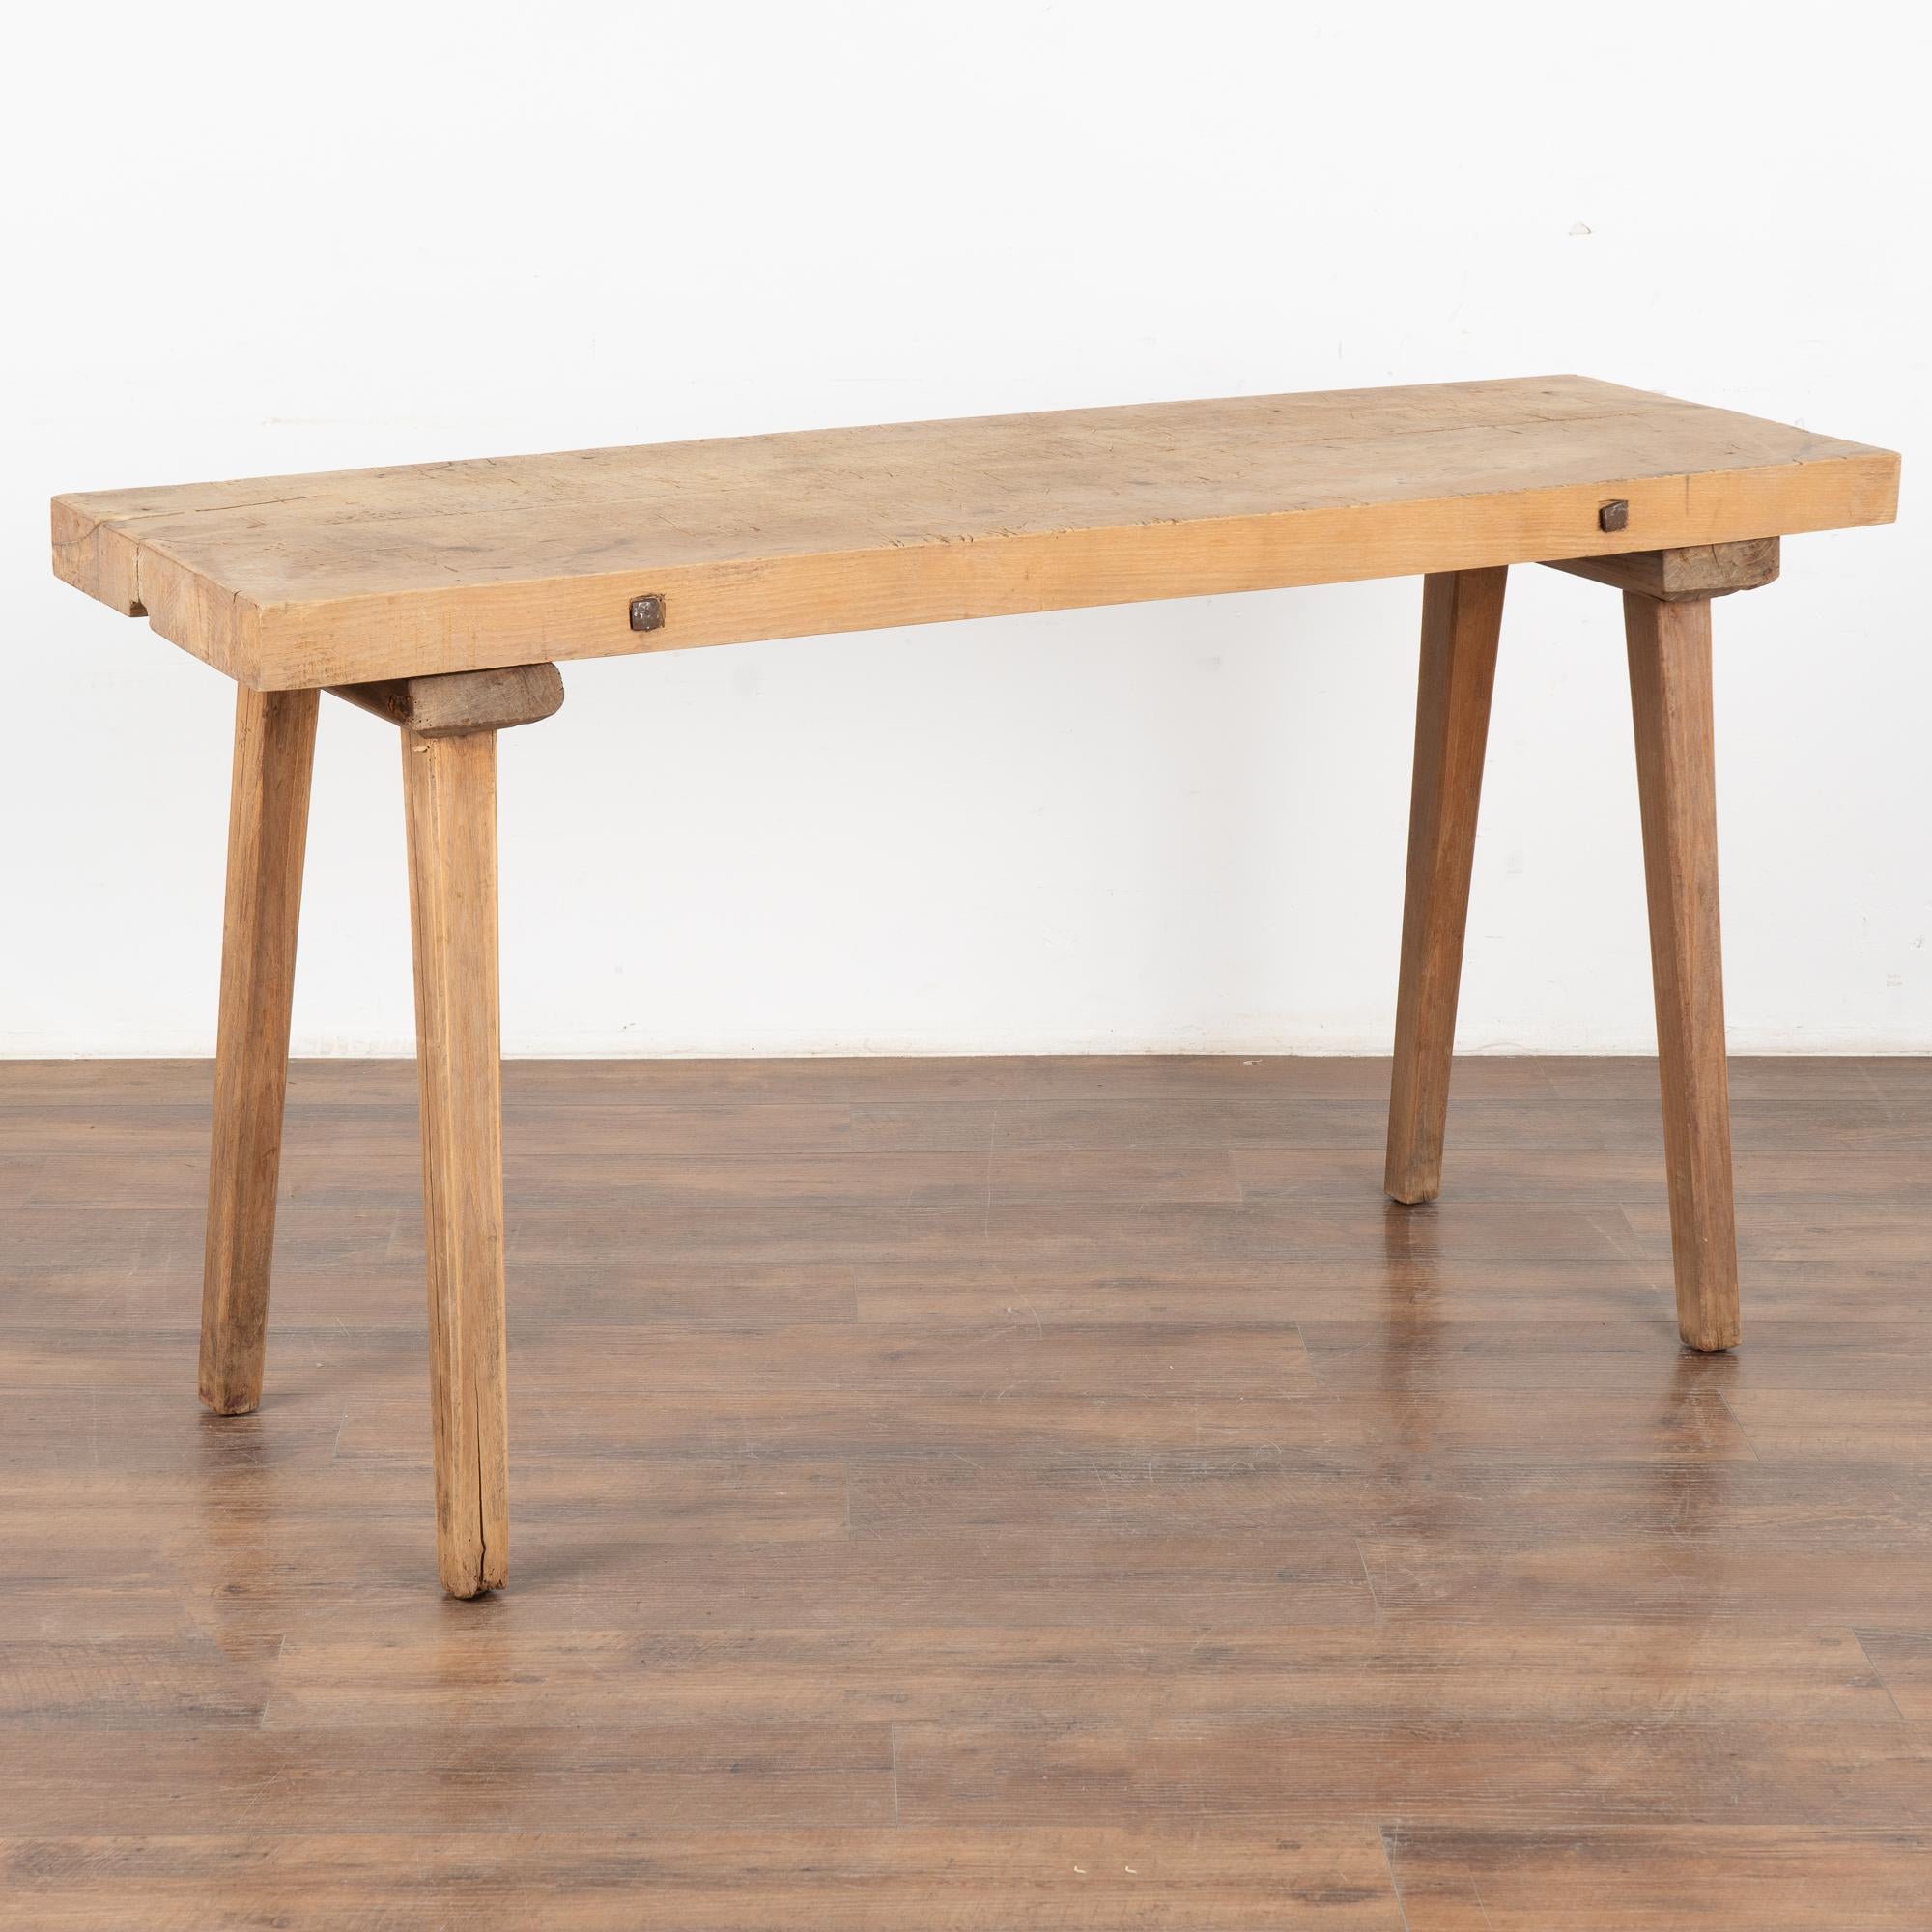 This 5' rustic plank top console table with splay peg legs originally served as a work table. Iron bolts along the edge add a slight industrial feel.
The thick top invites one to run fingers along it, while stains, cracks, nicks, and gouges all add